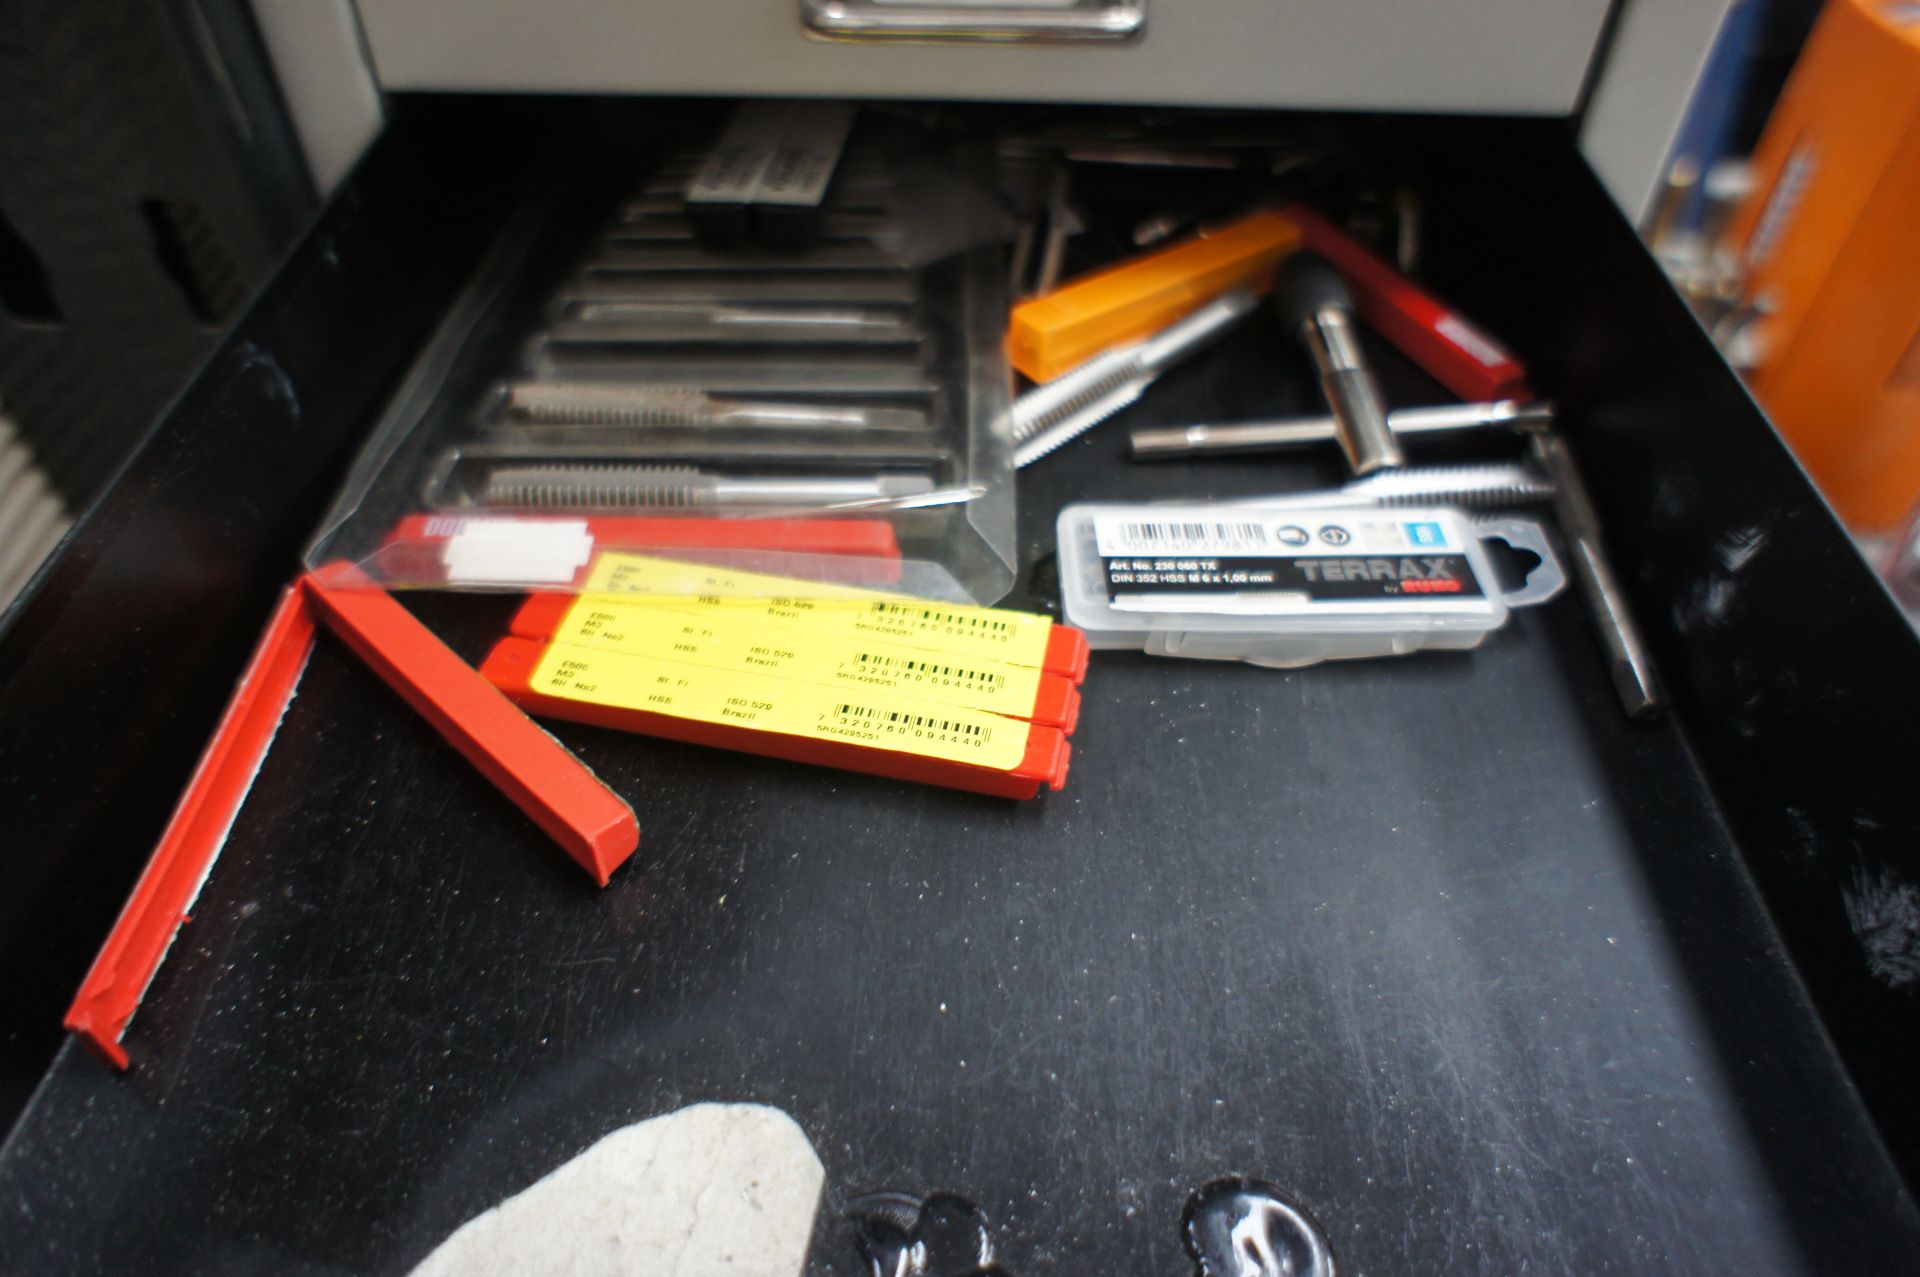 Bisley 10 drawer metal storage cabinet, with contents, to include allen keys, screwdrivers, files - Image 5 of 7